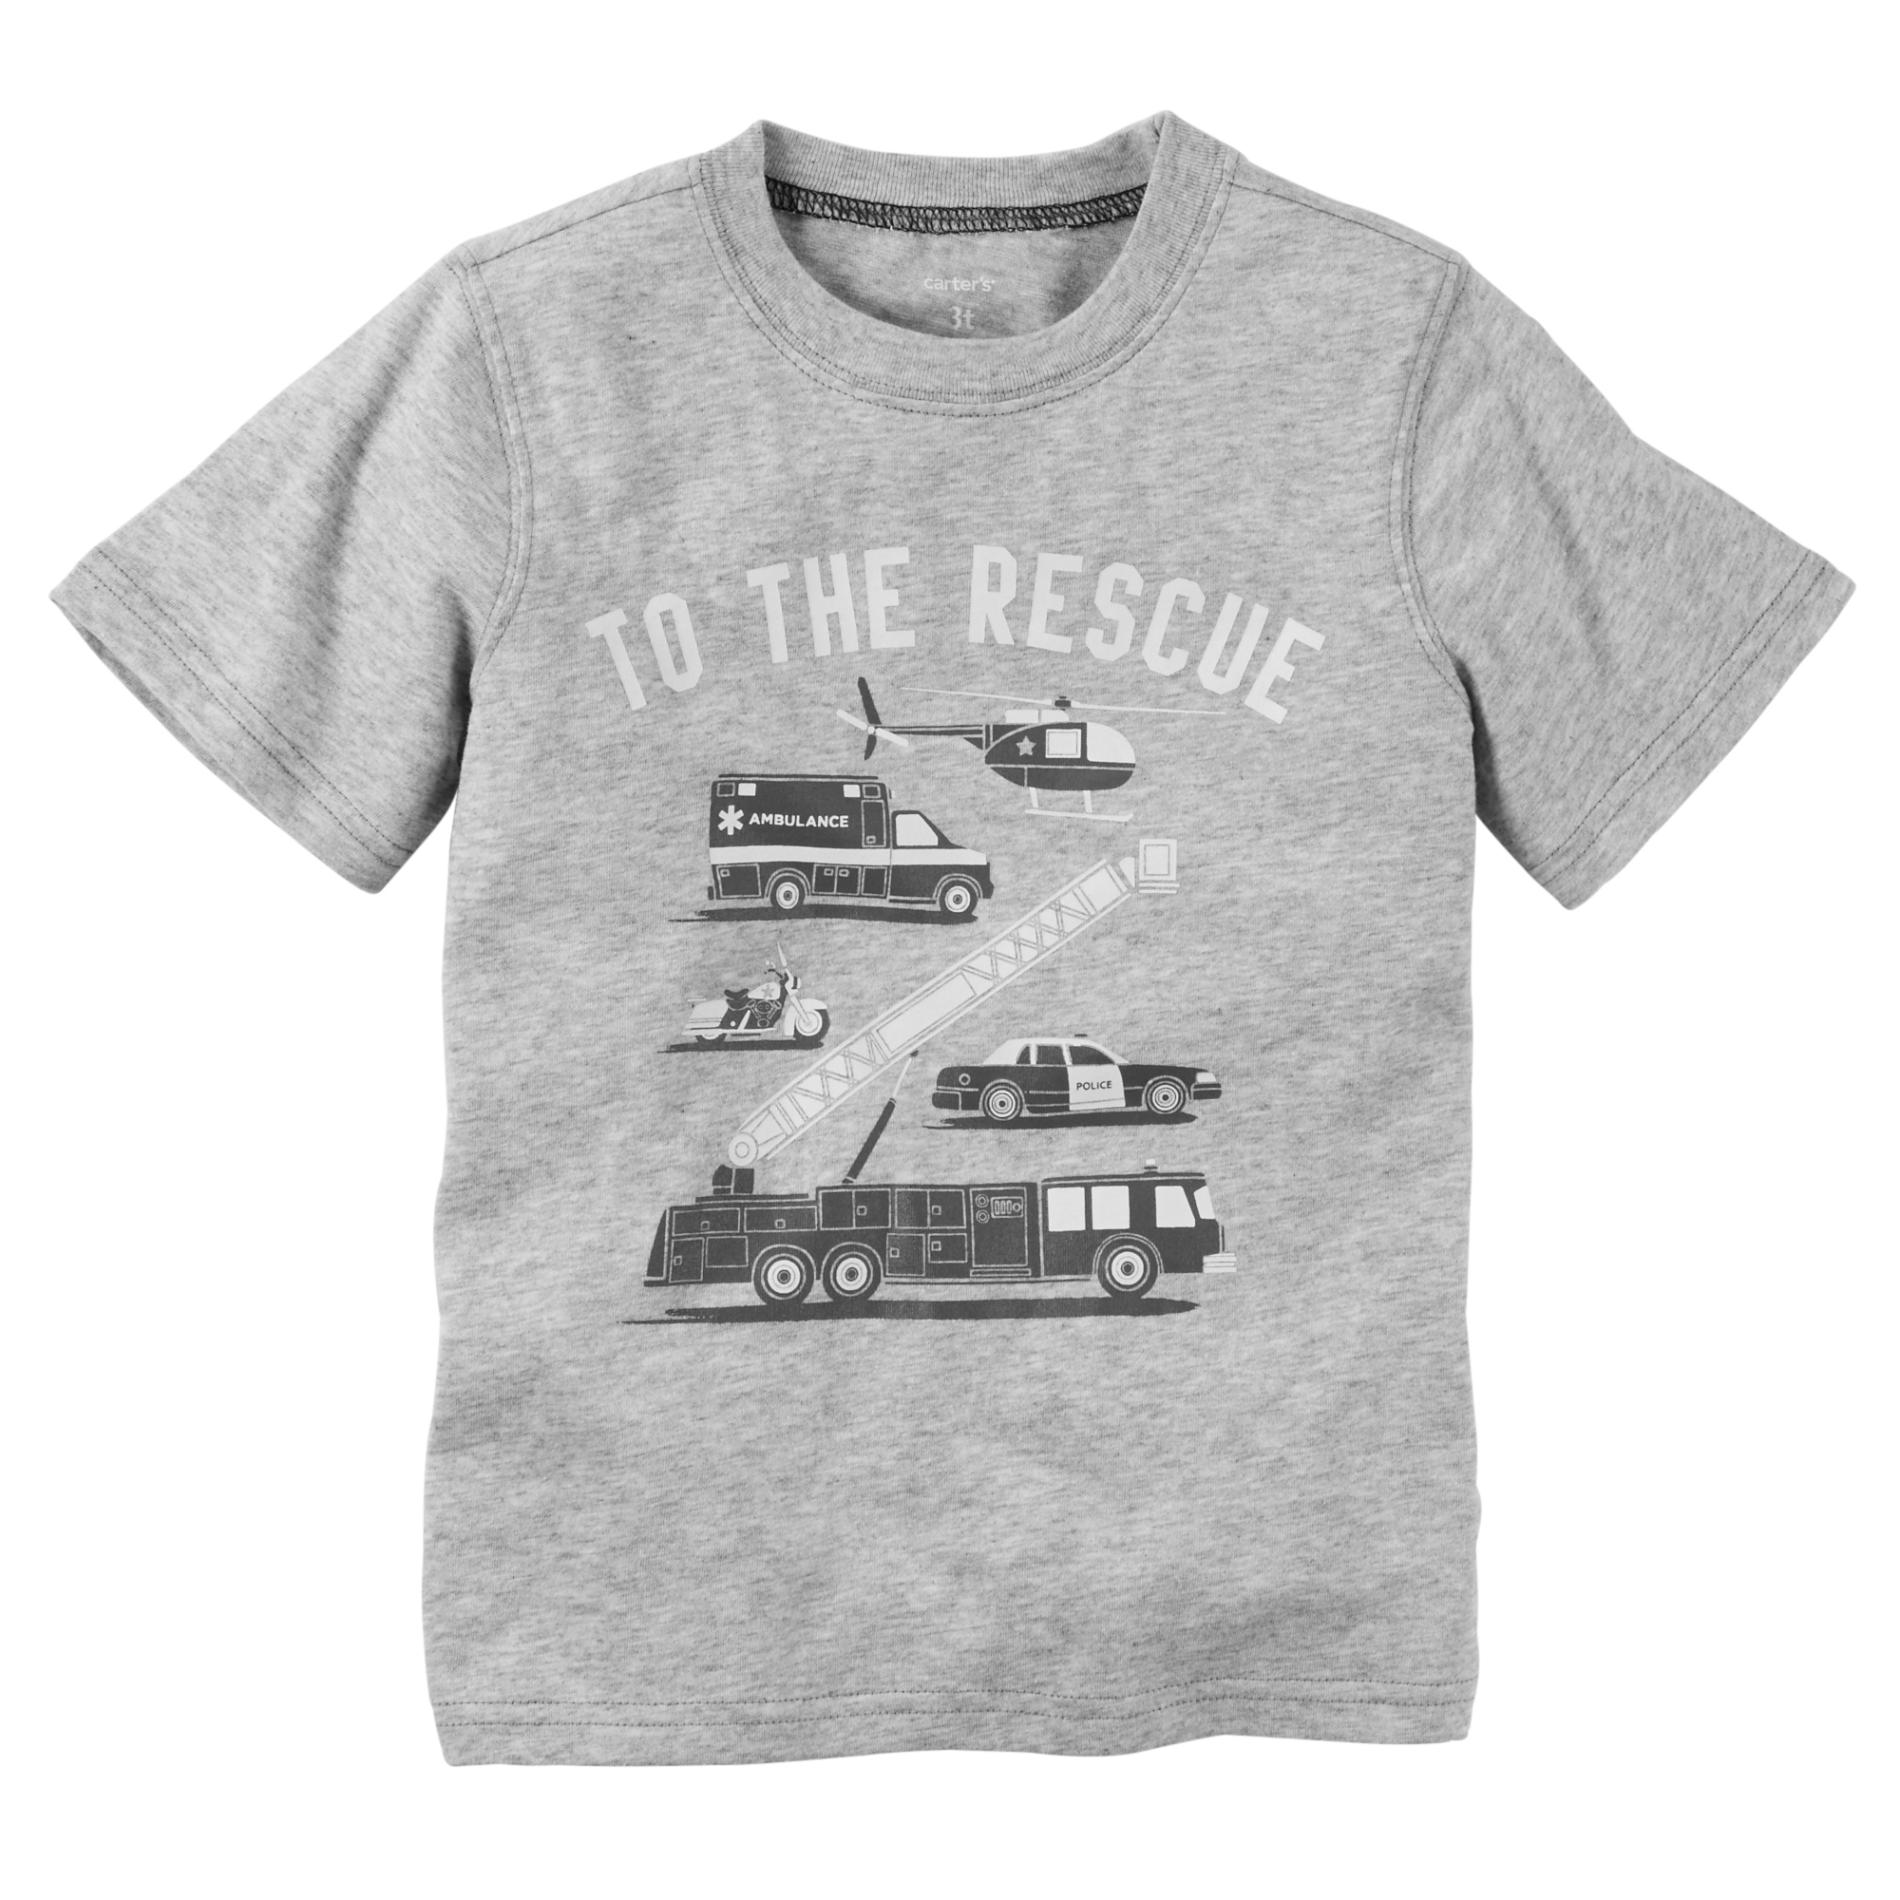 Carter's Toddler Boy's Graphic T-Shirt - Rescue